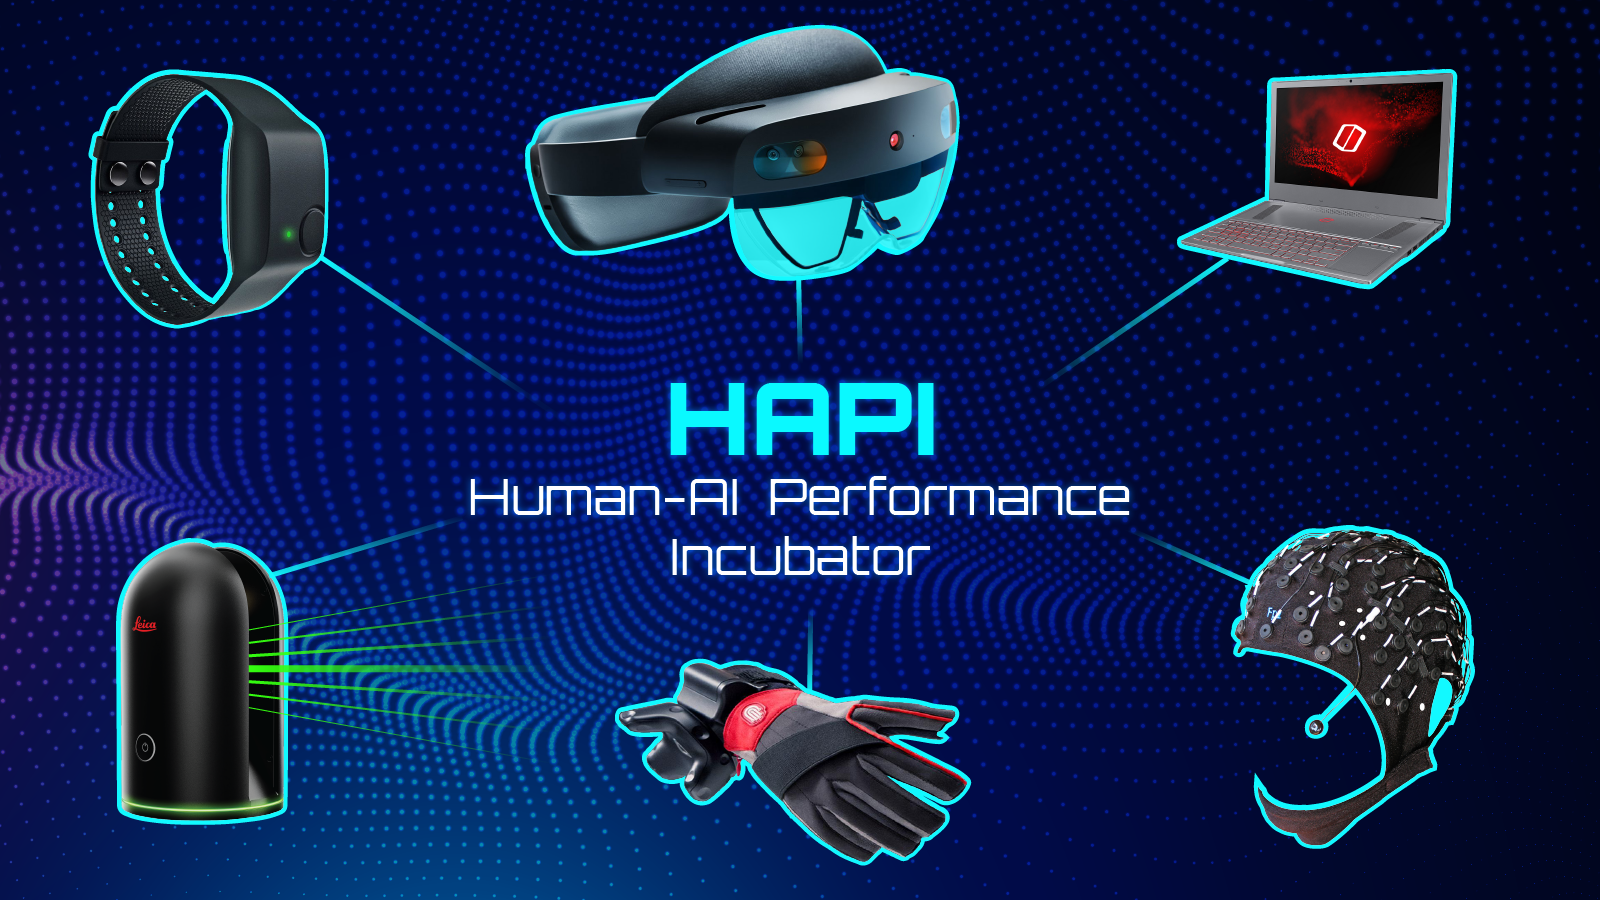 A graph with the words HAPI Human AI-performance against a blue background. Surrounding the words are images of technologies, including a wristband, a laptop, a sensored helmet, VR glasses, and gloves.